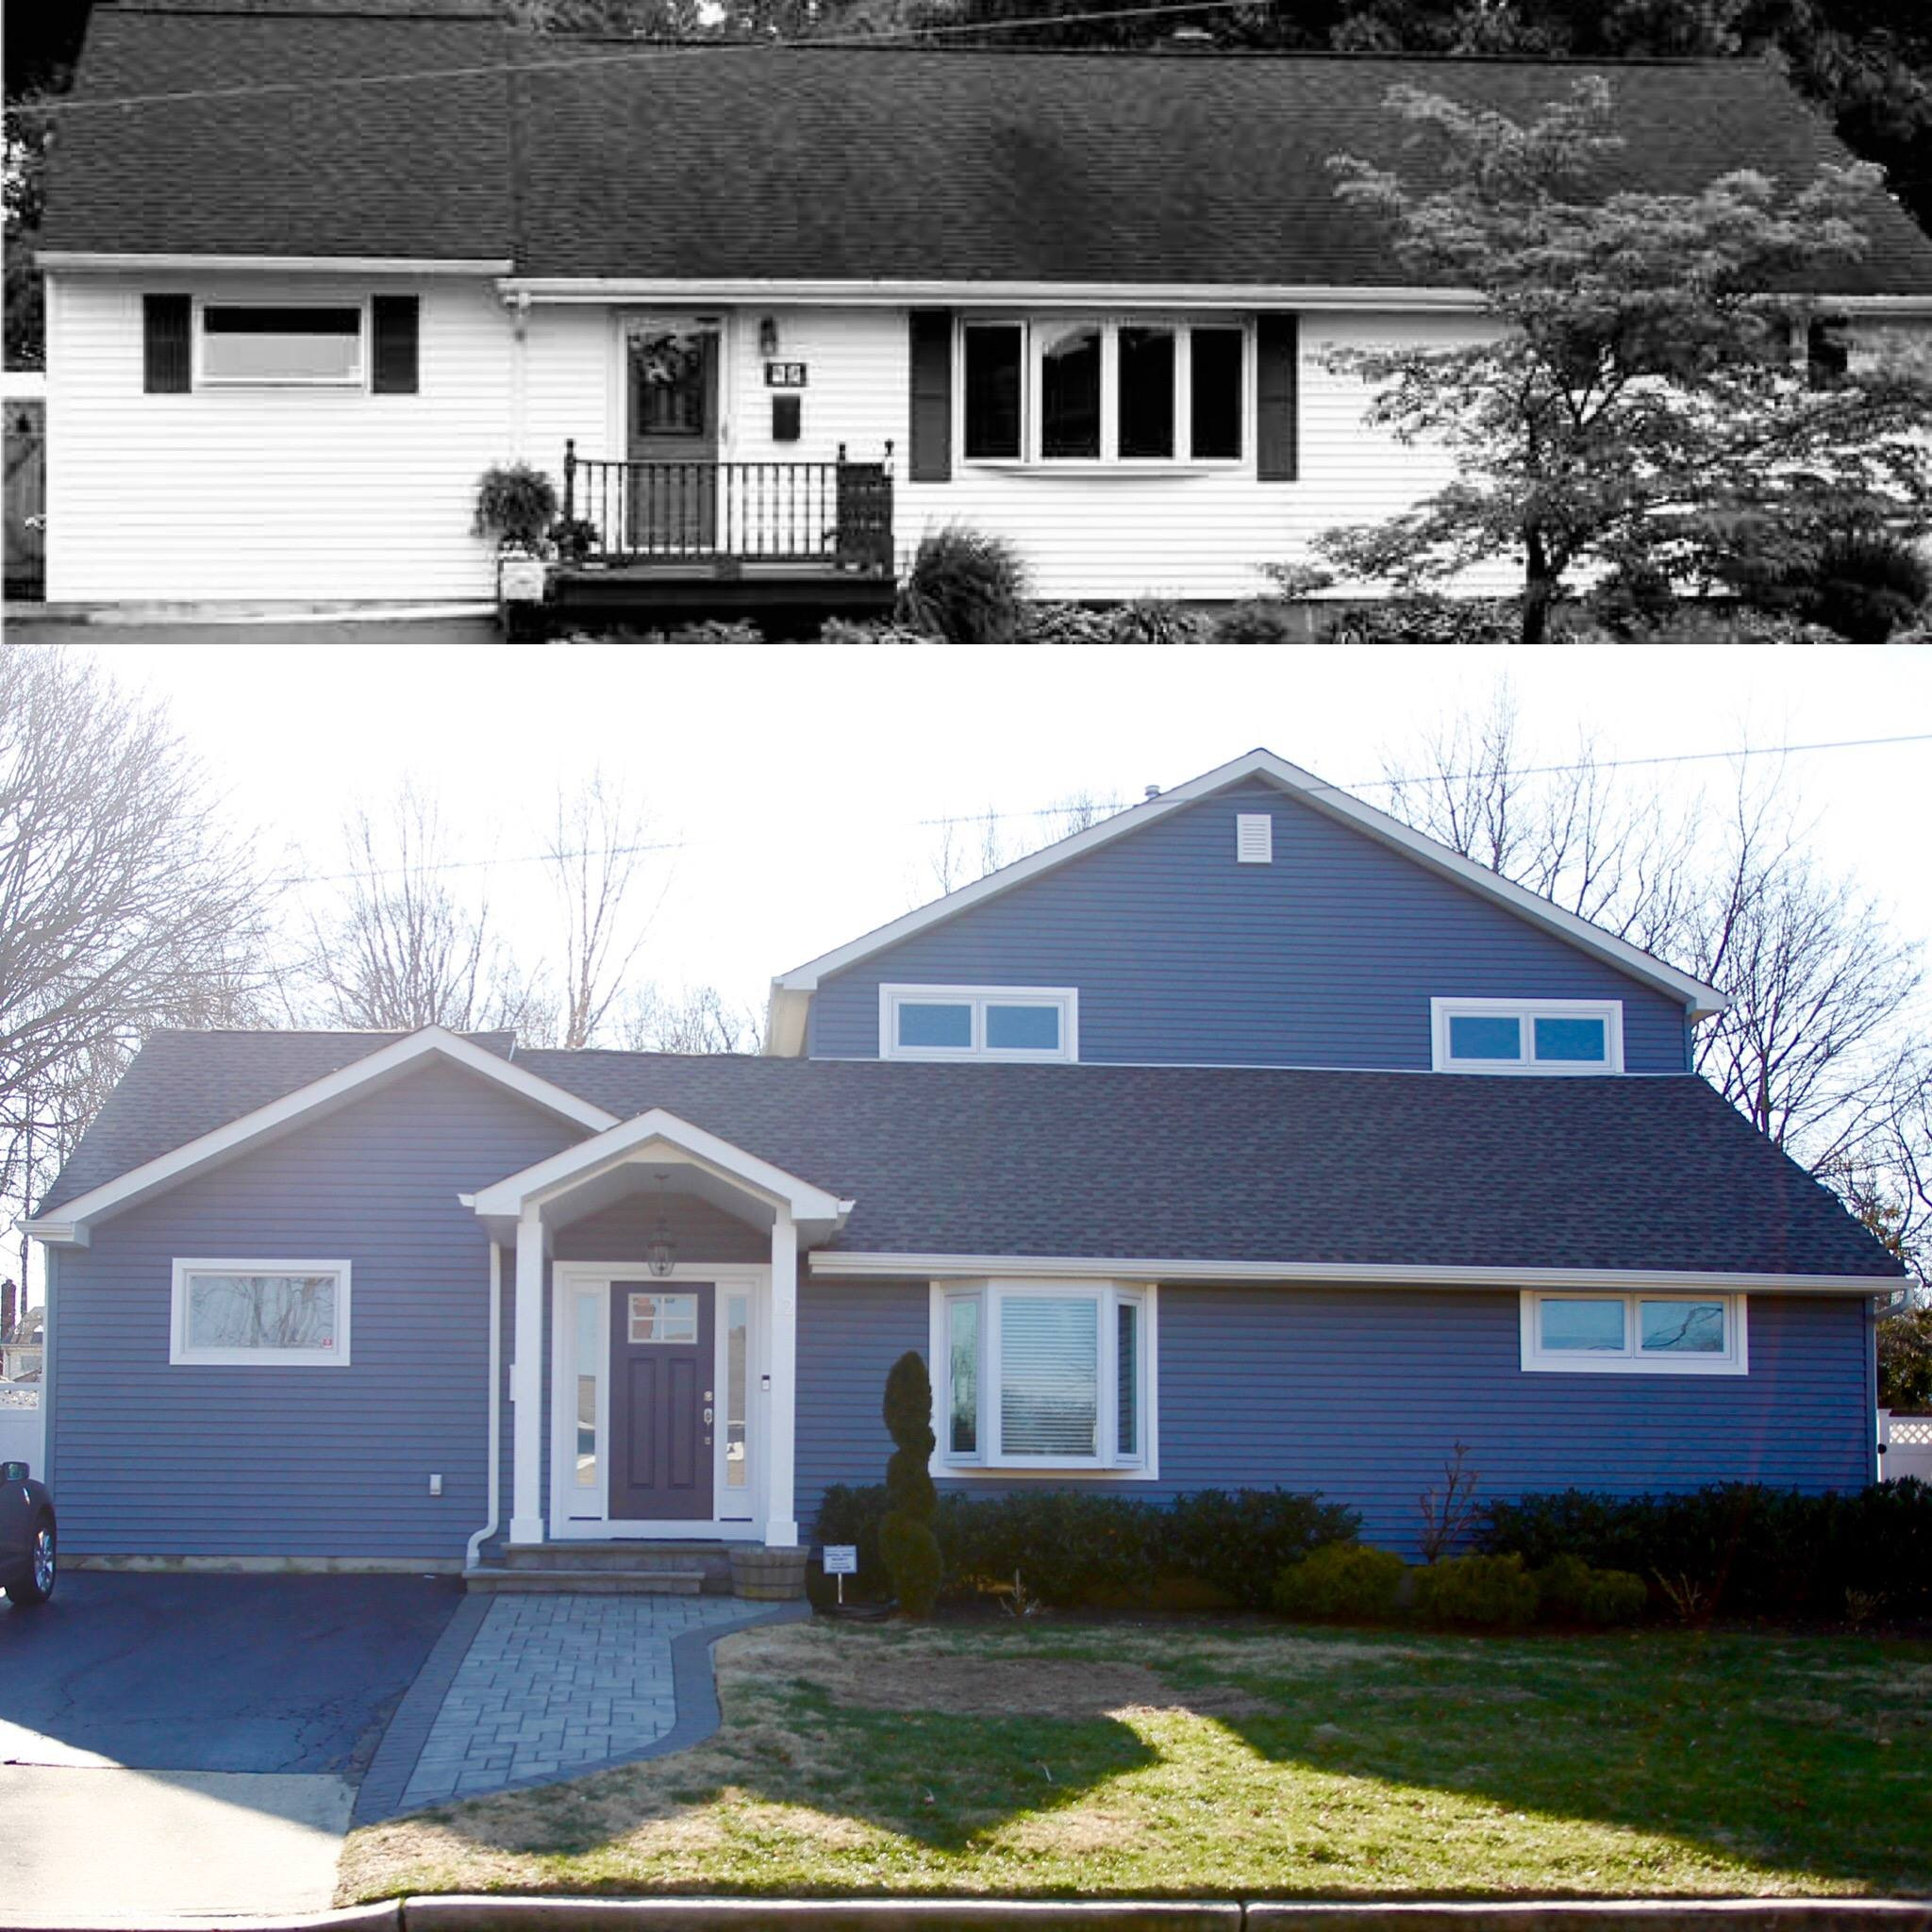 Front Exteriors-Before/After